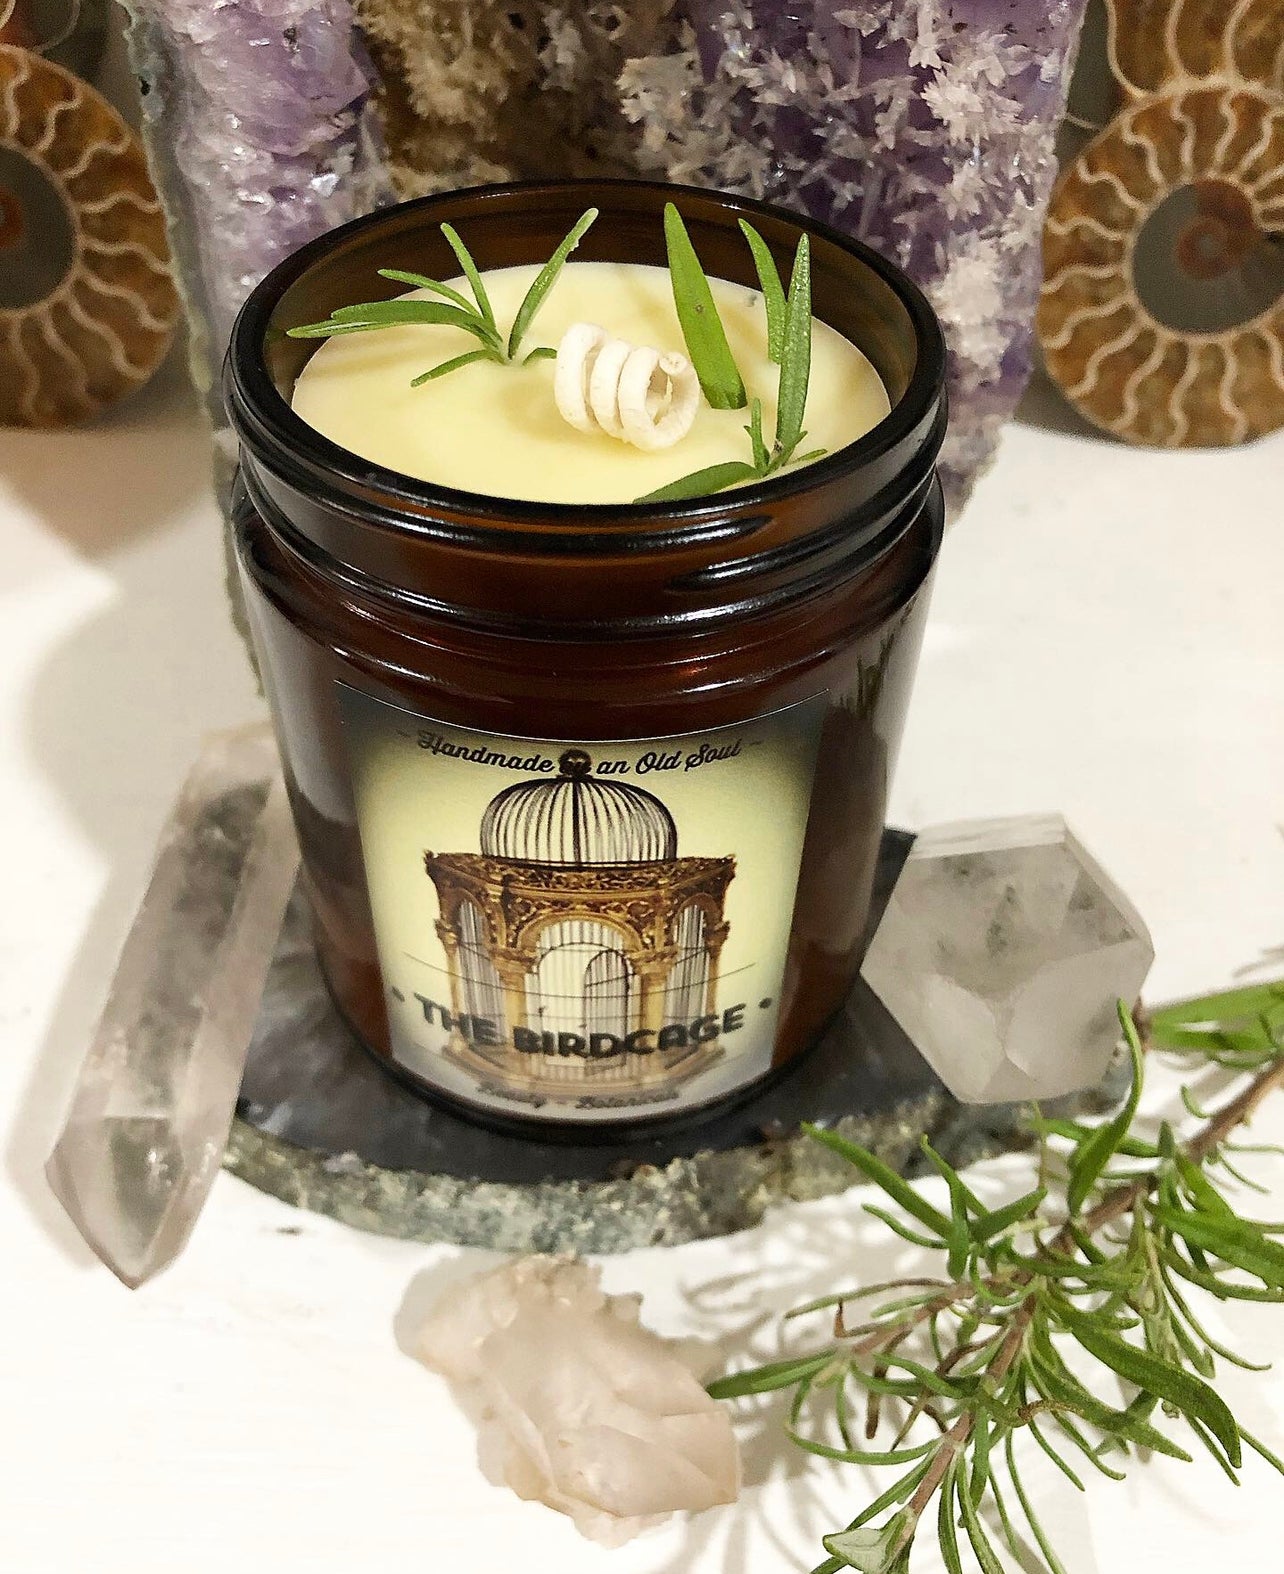 Vapor Rub* ~ Organic Wax Handmade Candle ~ (*smells like vapor rub*) Essential Oils ~ No perfumes ~  Congestion Aid Candle ~ Ideal Winter Candle or cold days*